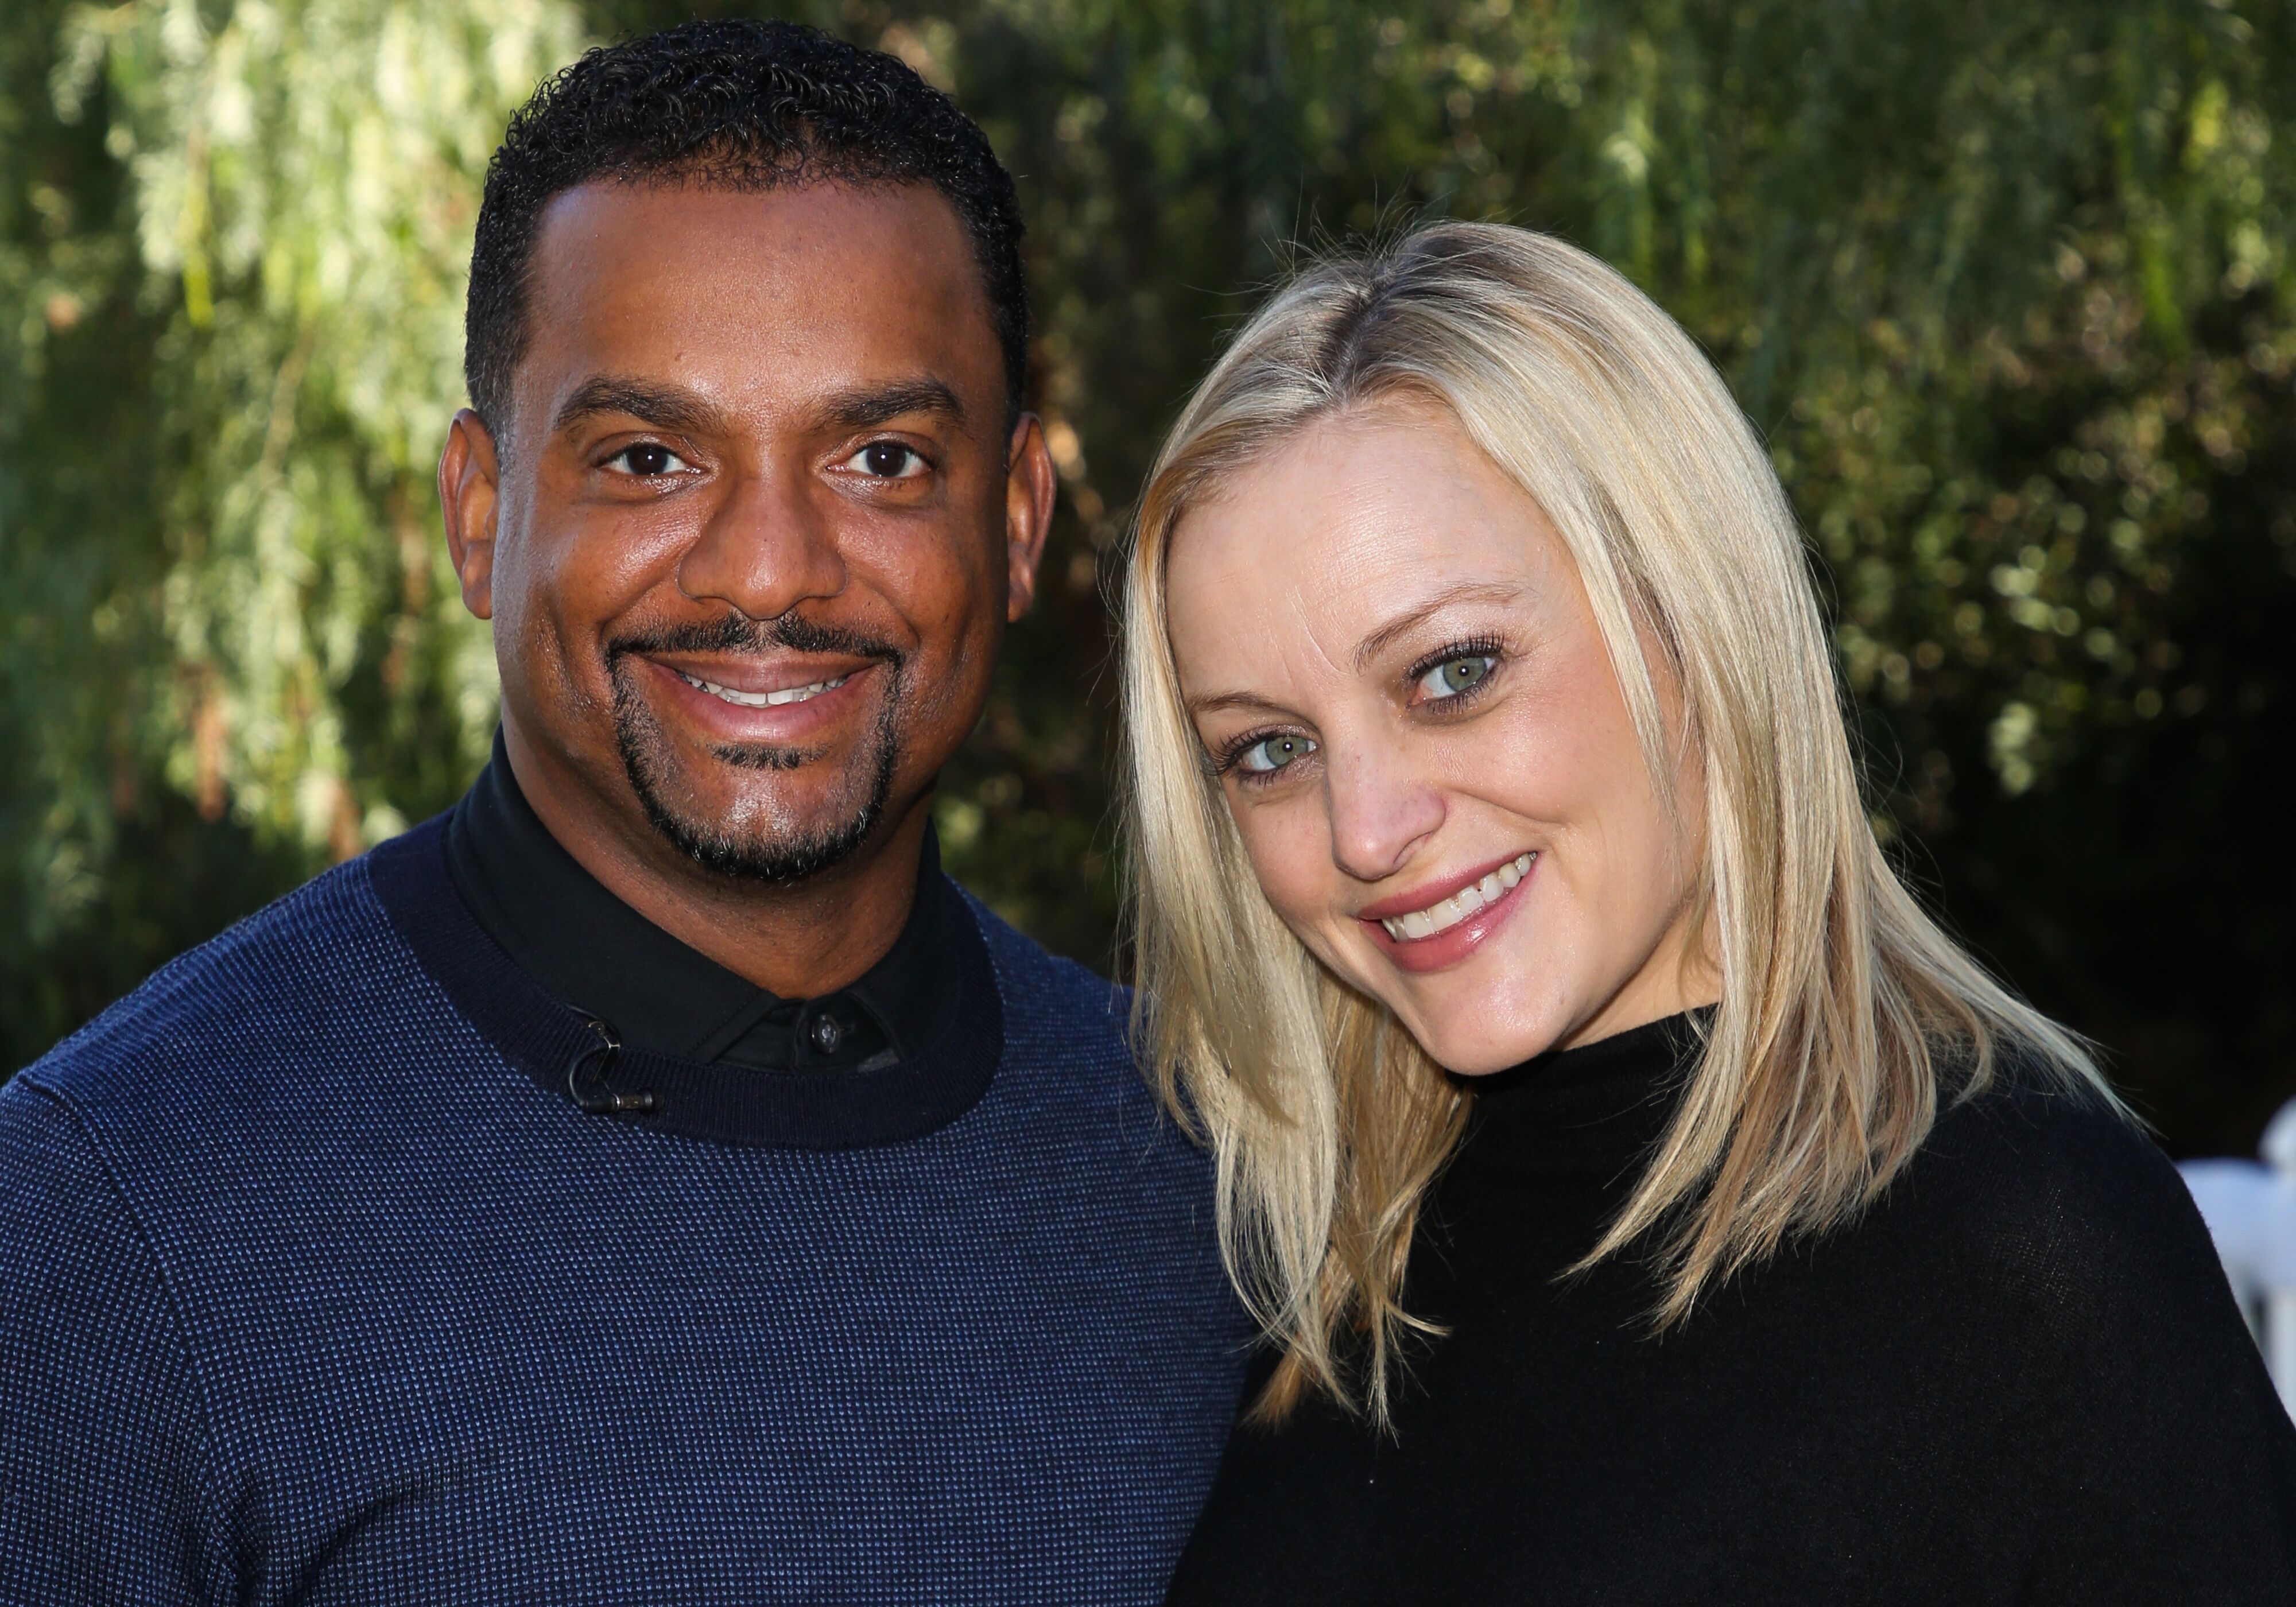 Alfonso Ribeiro and Angela Unkrich at Universal Studios Hollywood in 2018 | Source: Getty Images